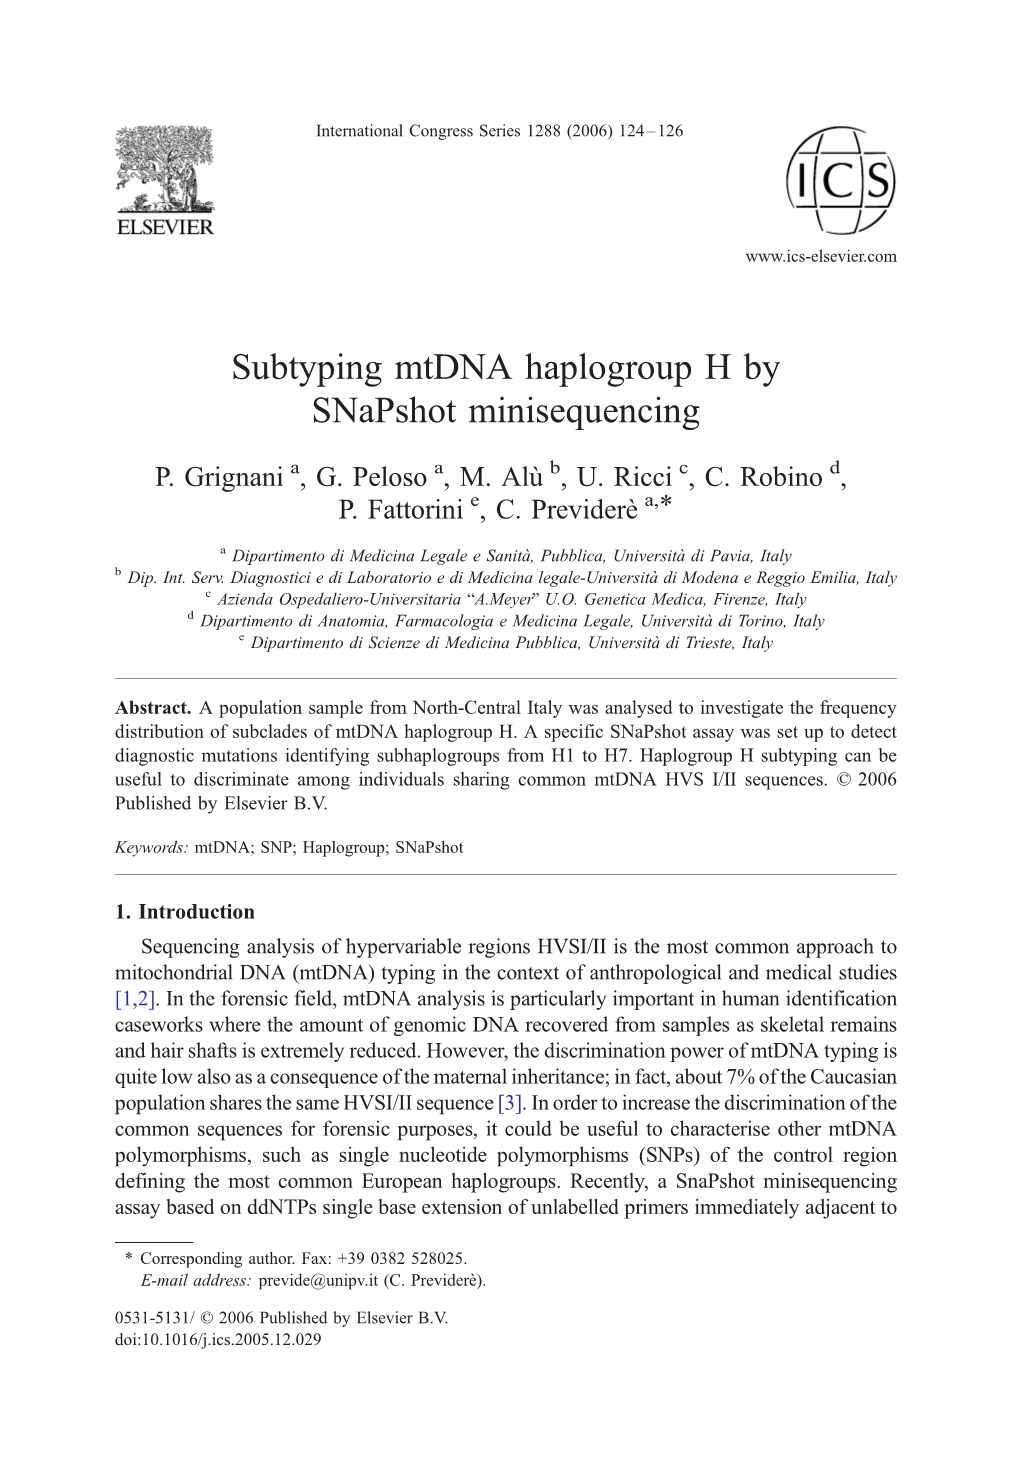 Subtyping Mtdna Haplogroup H by Snapshot Minisequencing